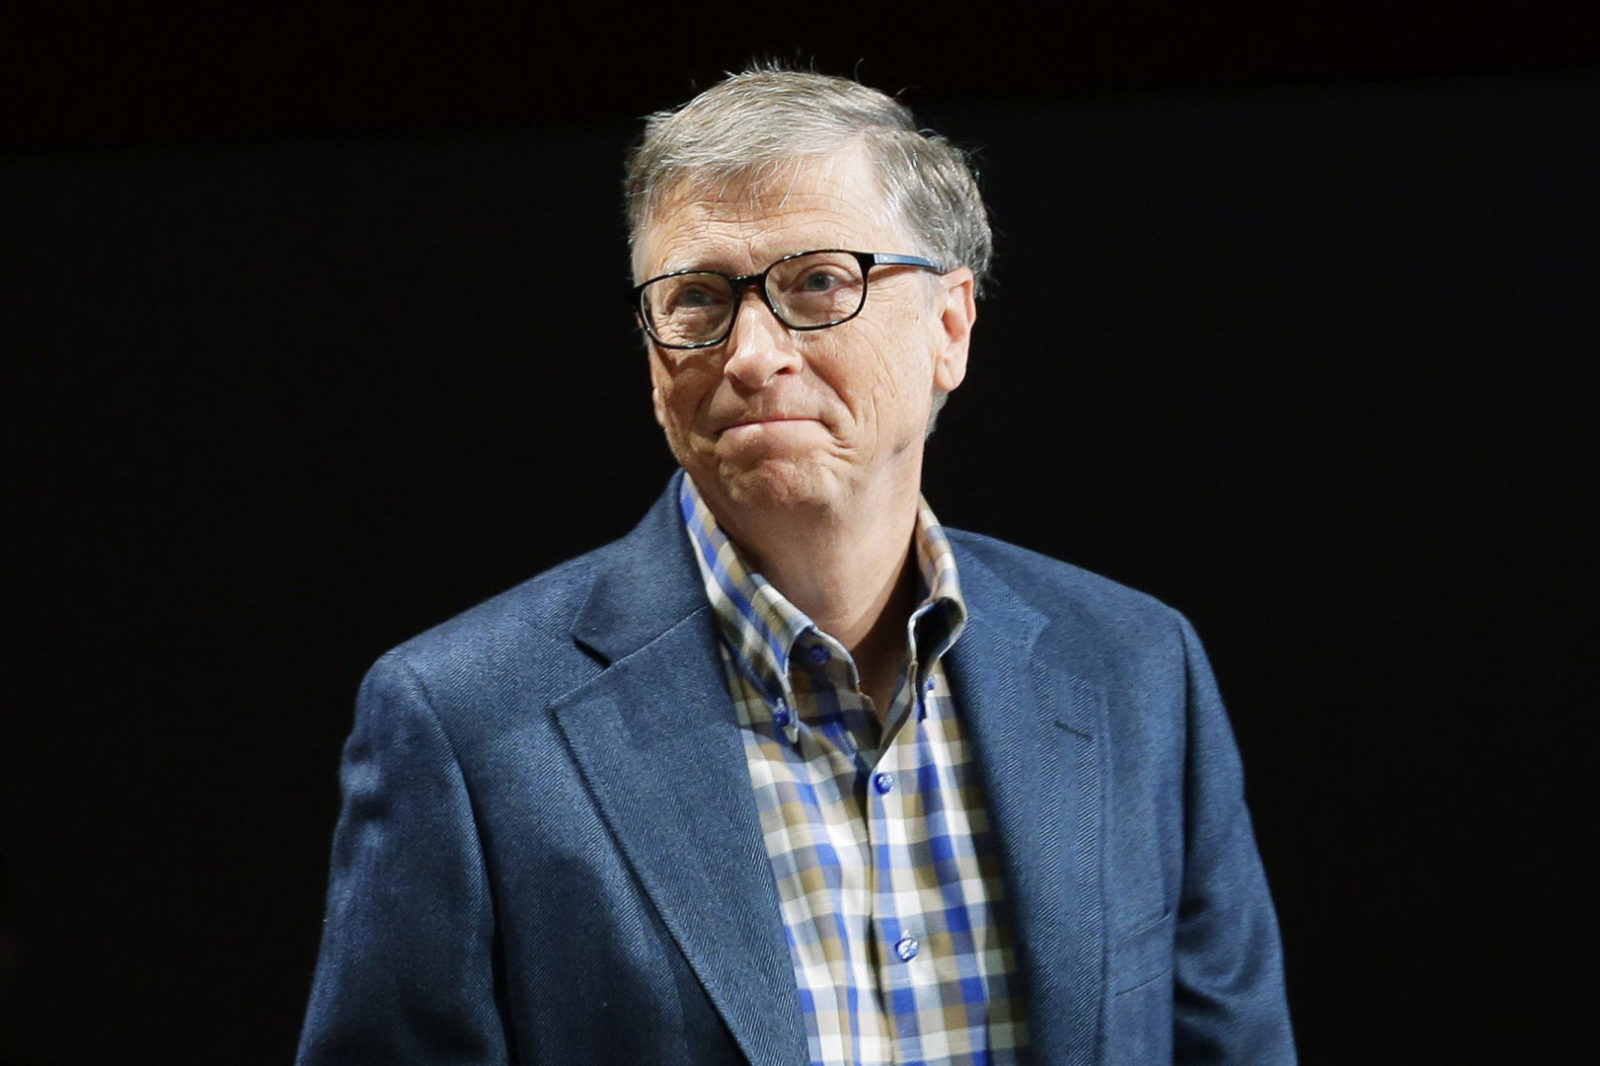 Bill Gates admits Jeffrey Epstein earned curability because of their meeting; regrets spending time